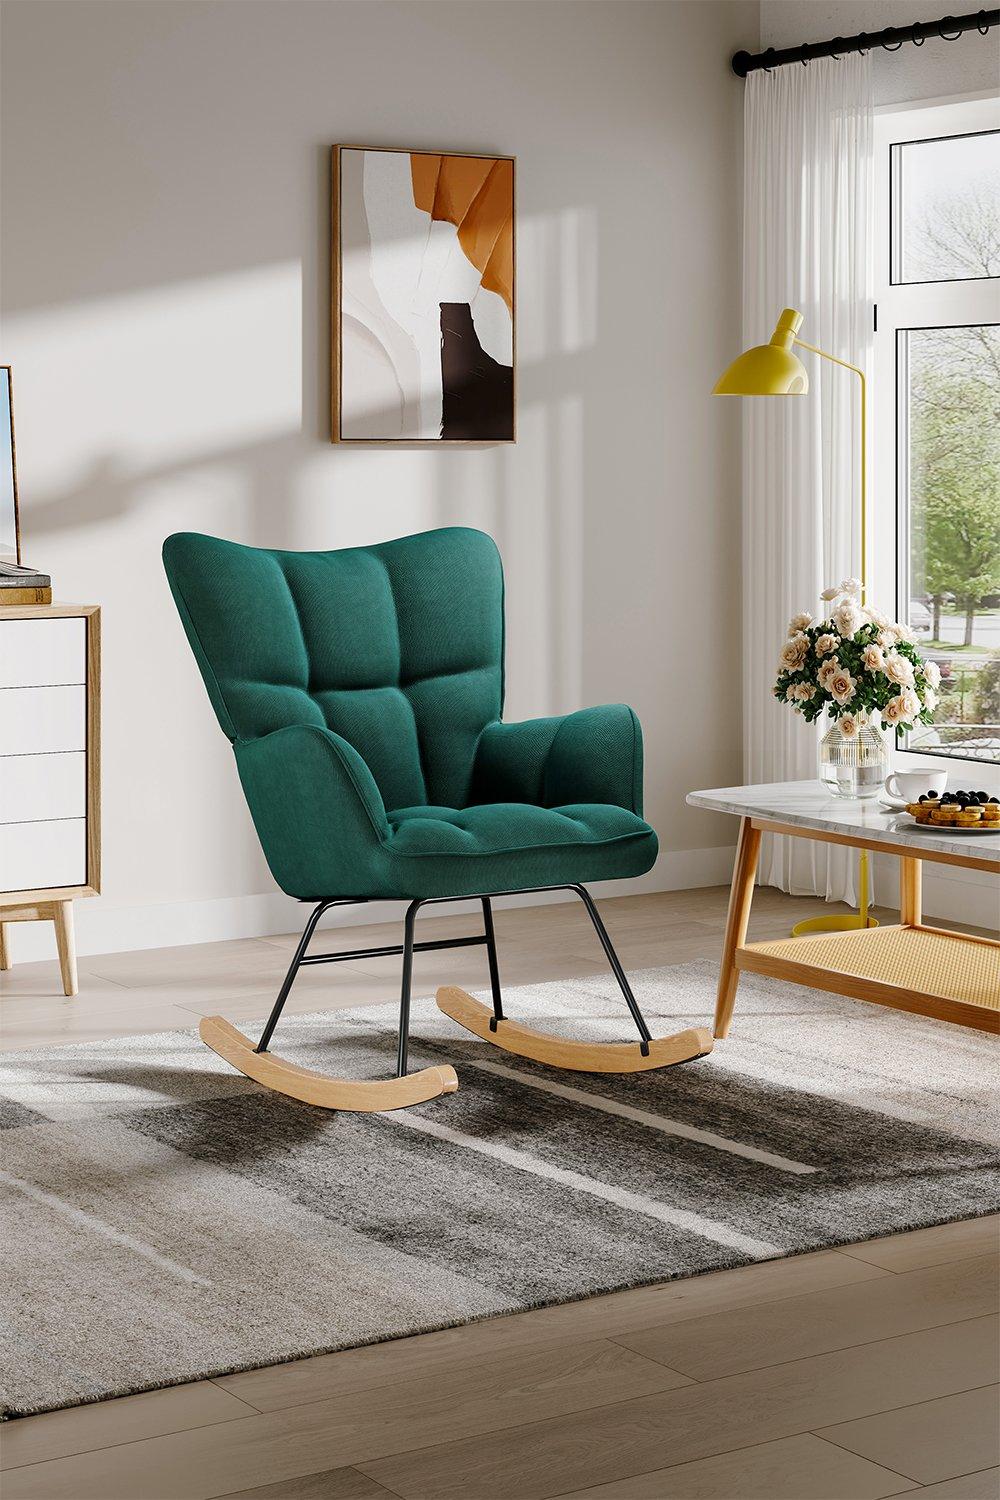 Green Linen Check Tufted Rocking Chair